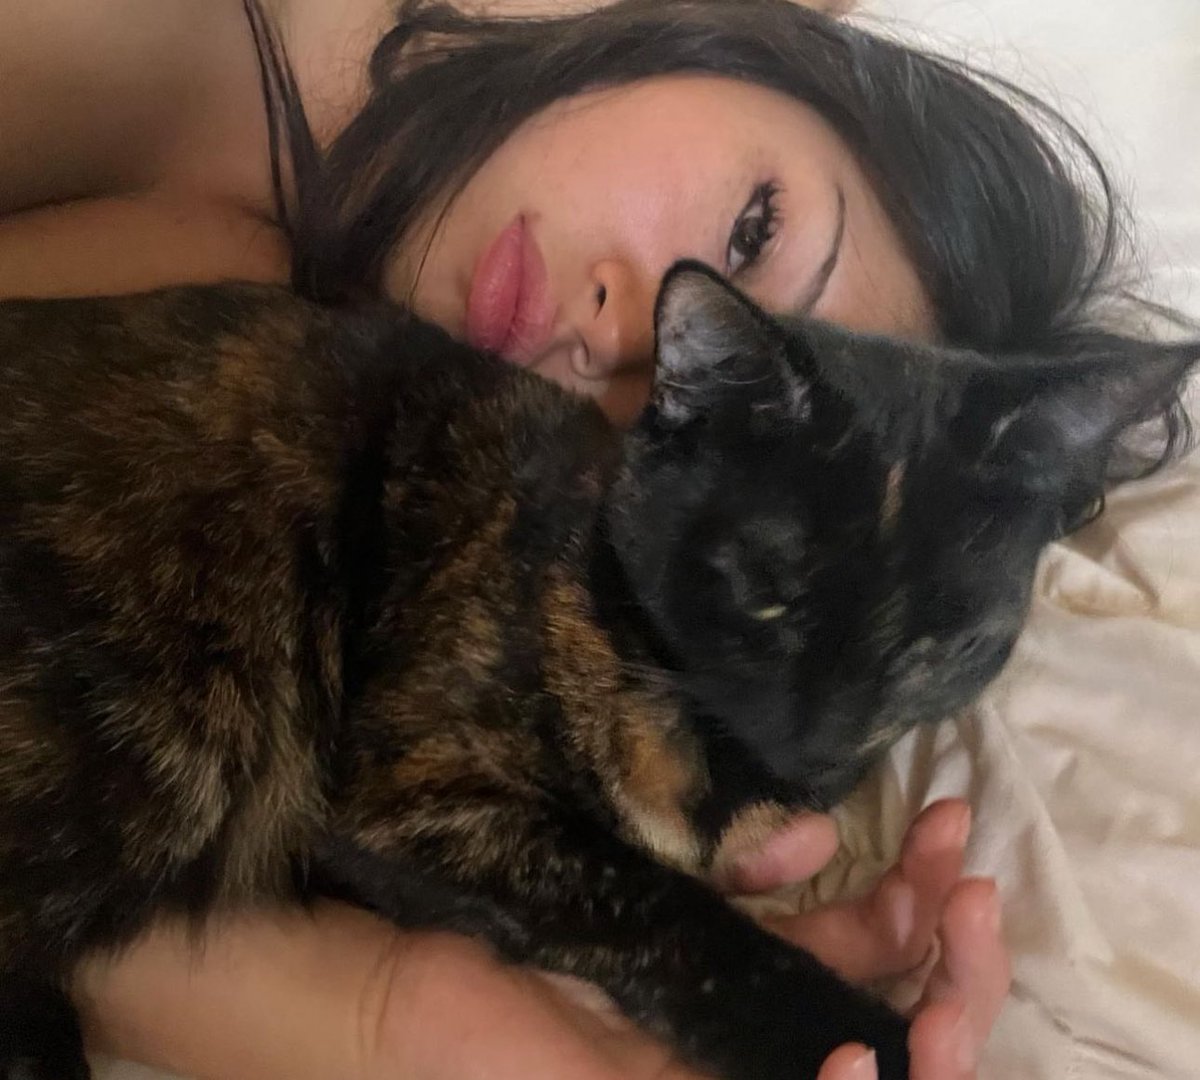 perfect pair over 200 million streams on spotify!!!! i love u guys. i will celebrate by cuddling my cat